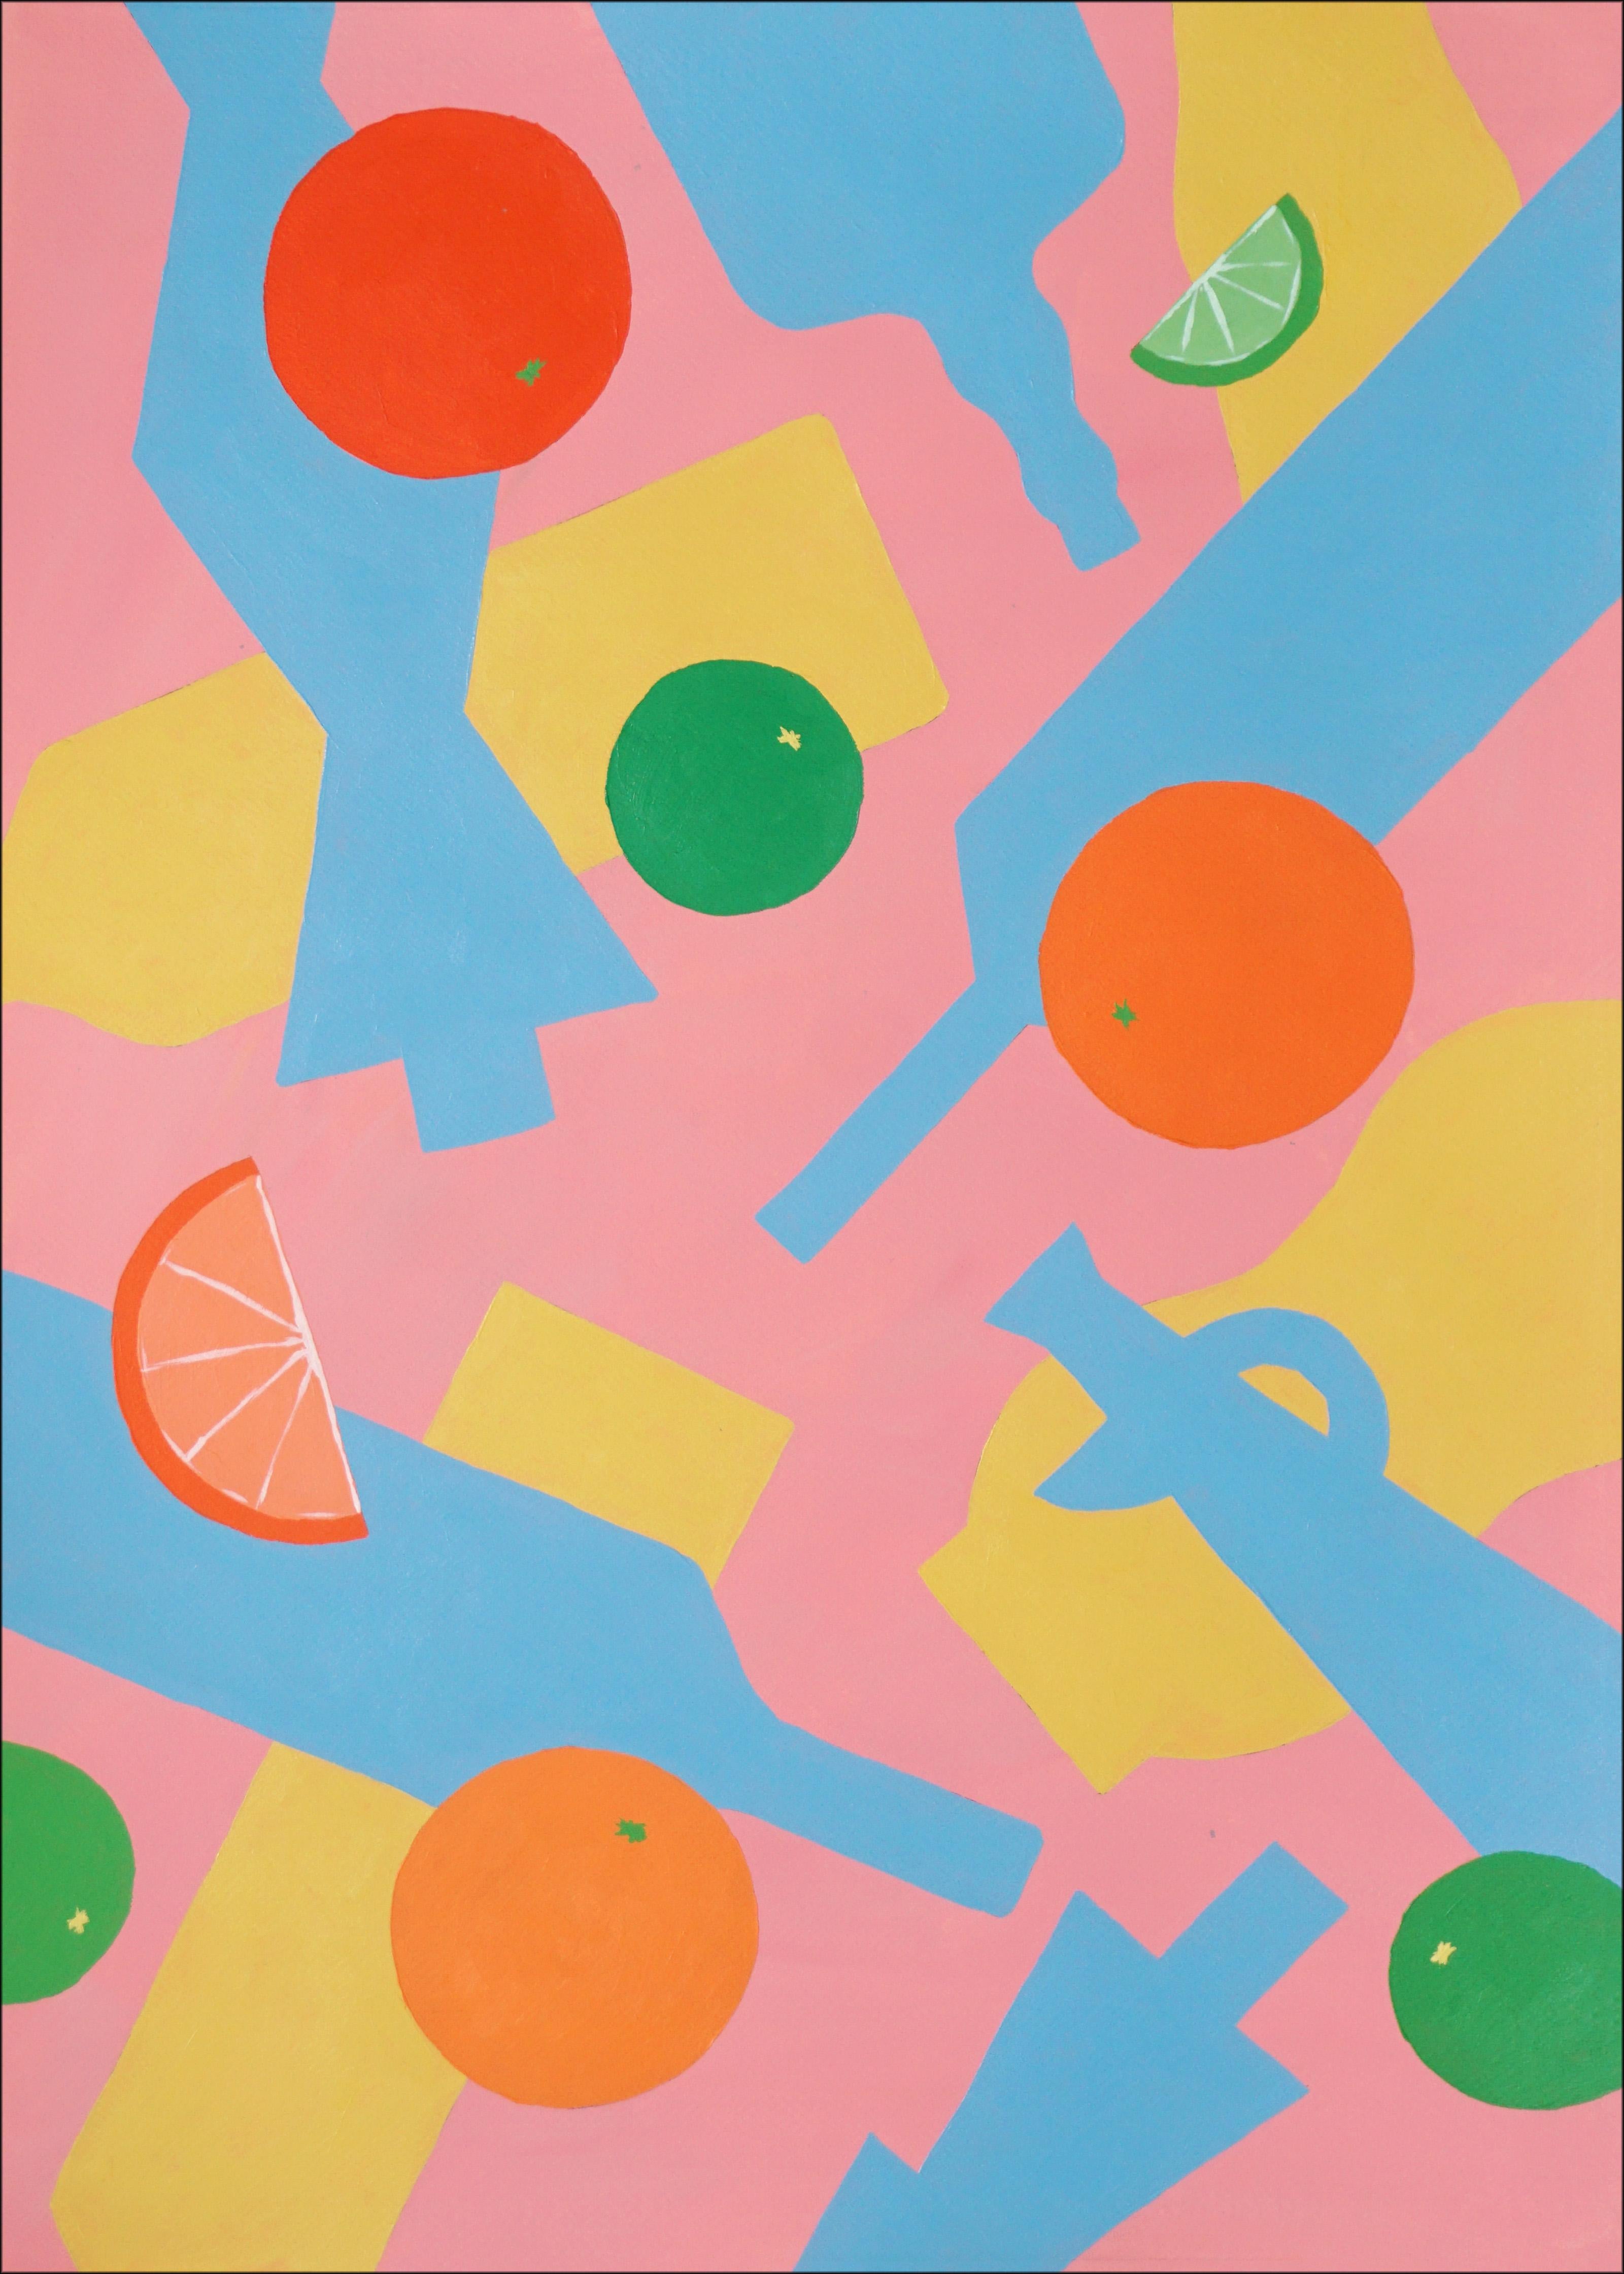 Bottles and Falling Citrus Fruits, Pink, Yellow and Blue Silhouette Patterns